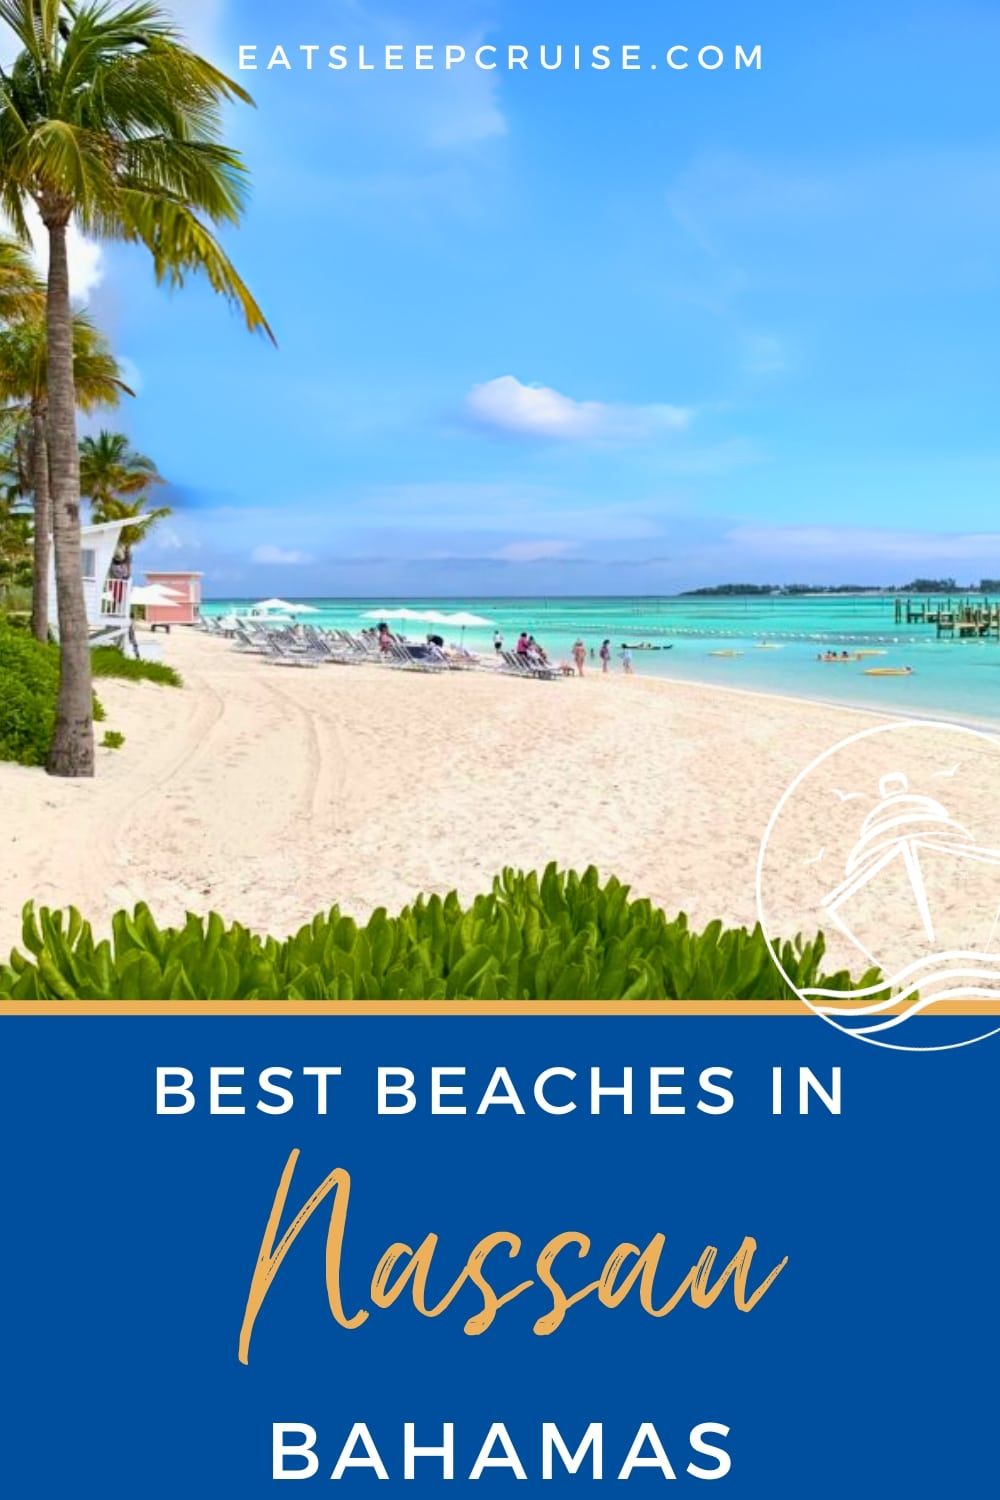 Here's Our Picks for the Best Beaches in Nassau, Bahamas For Cruisers 1